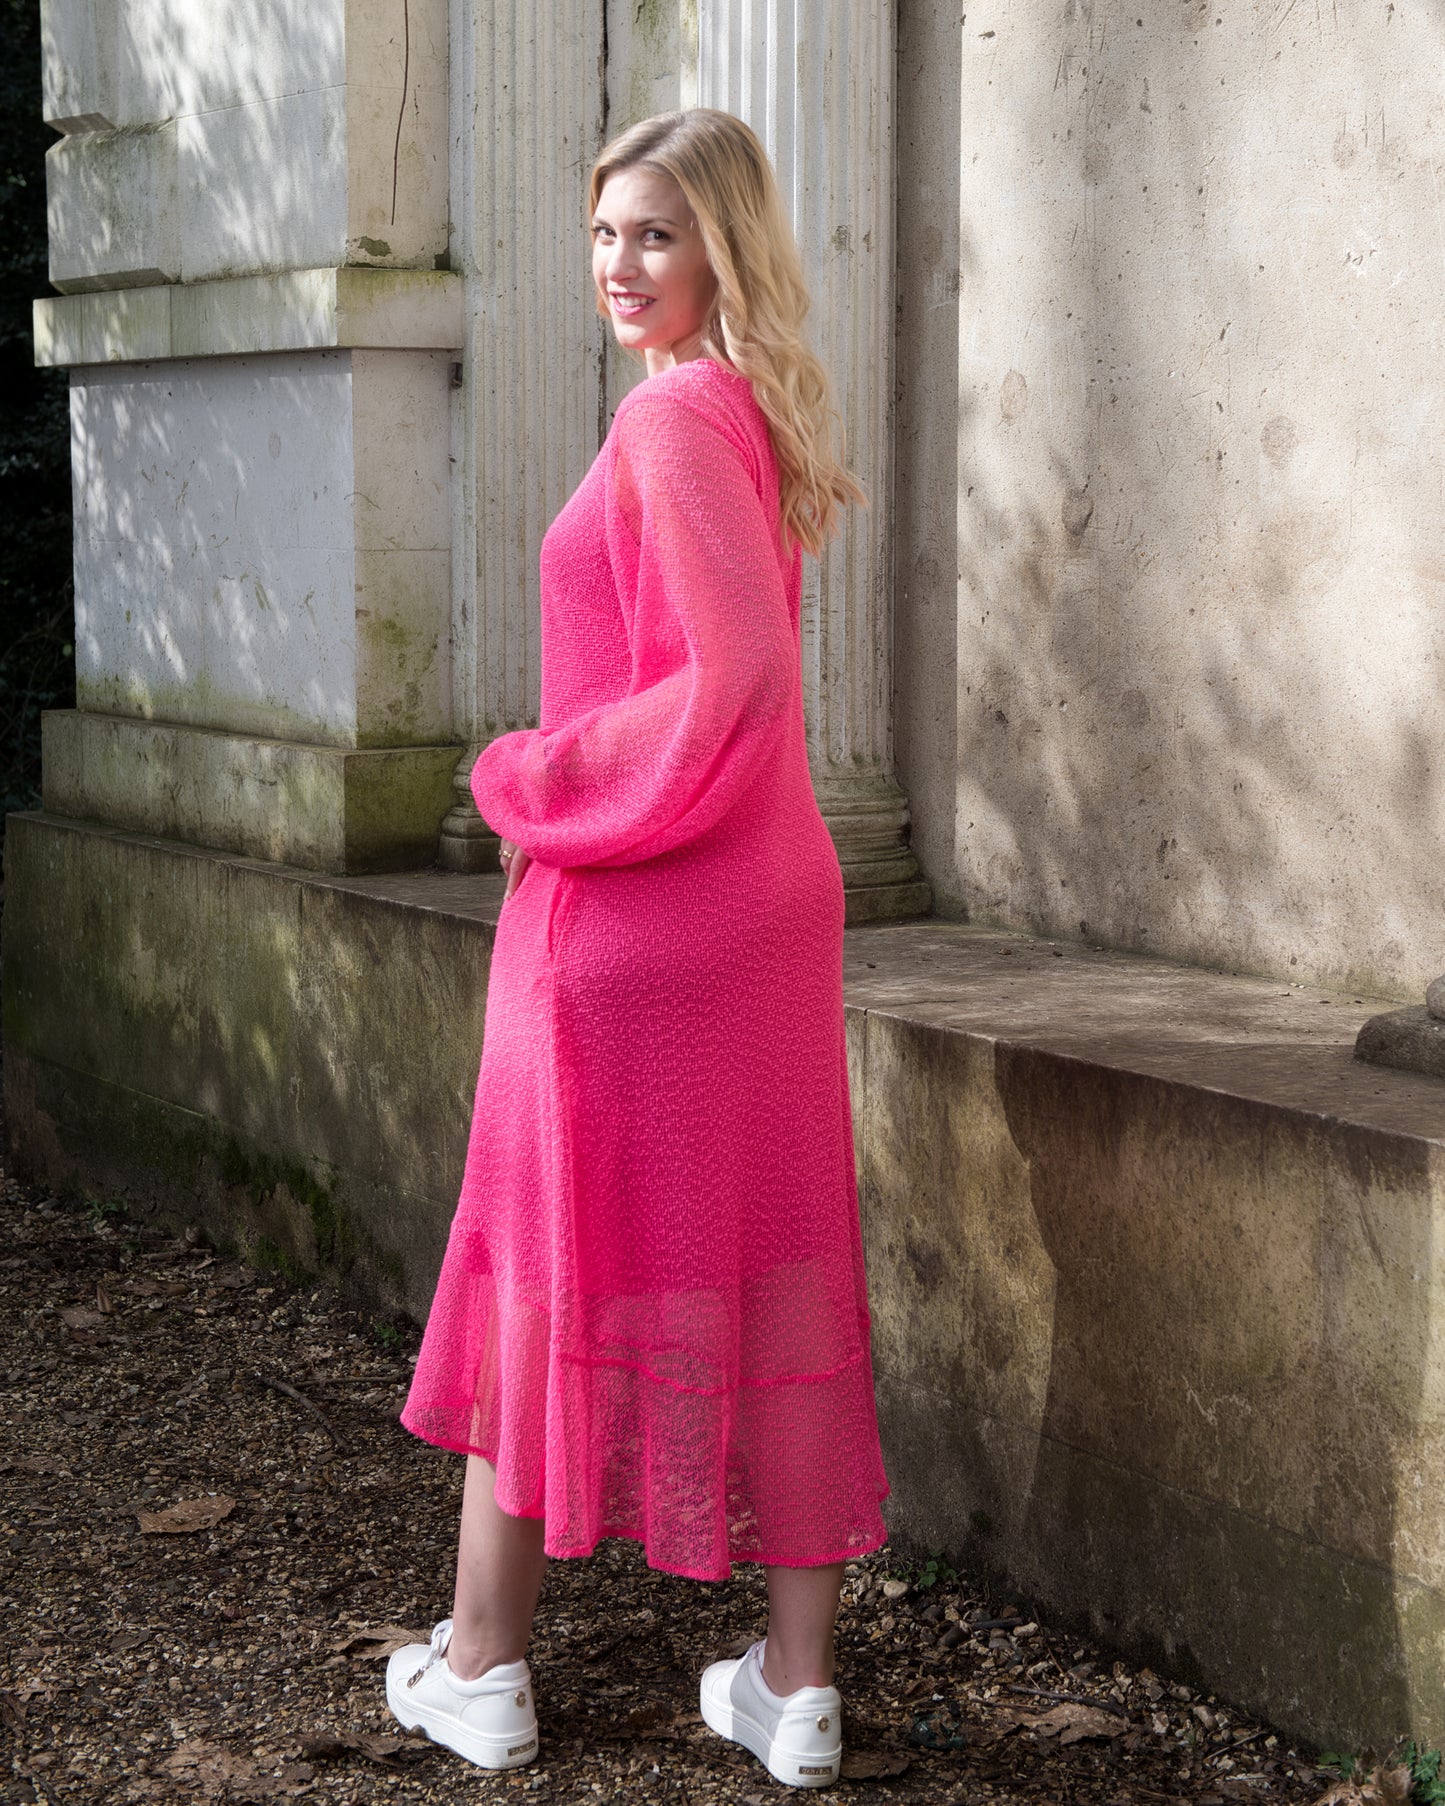 Women's Aphrodite Hot Pink Holiday Resort Dress with a hot pink undergarment shown from the side, paired with white sneakers